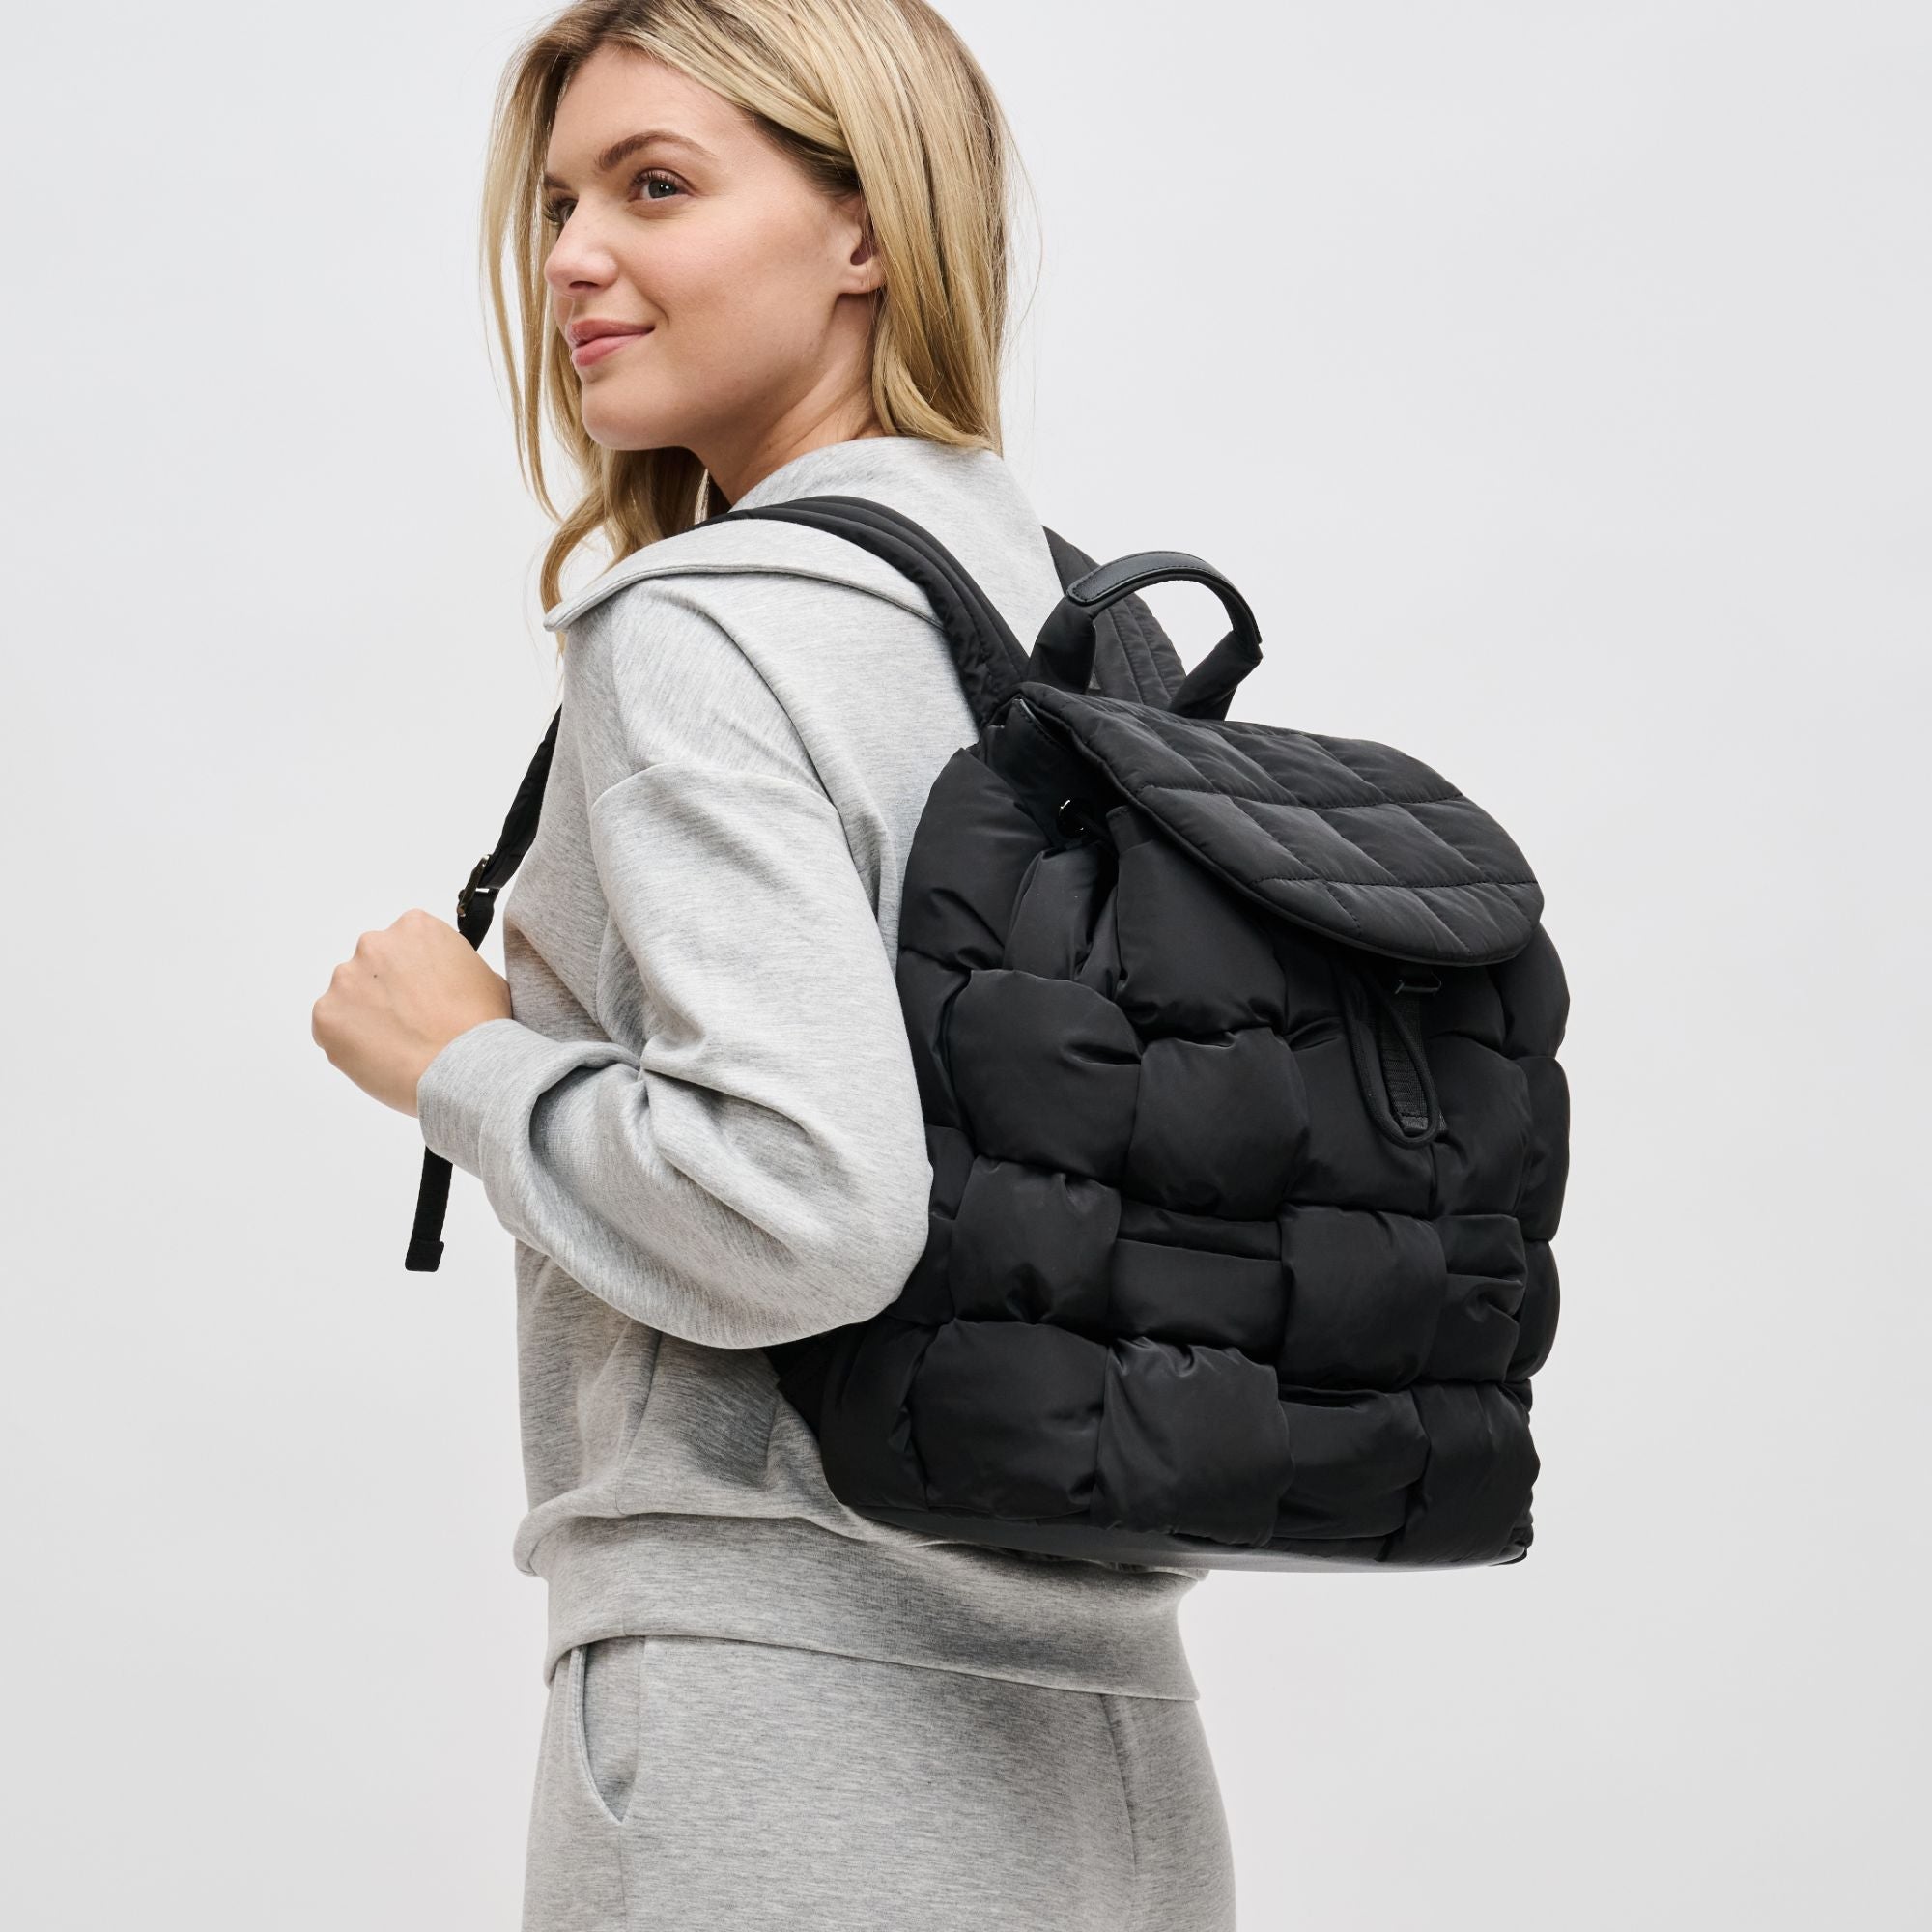 a model in a black puffer backpack and a gray sweater set